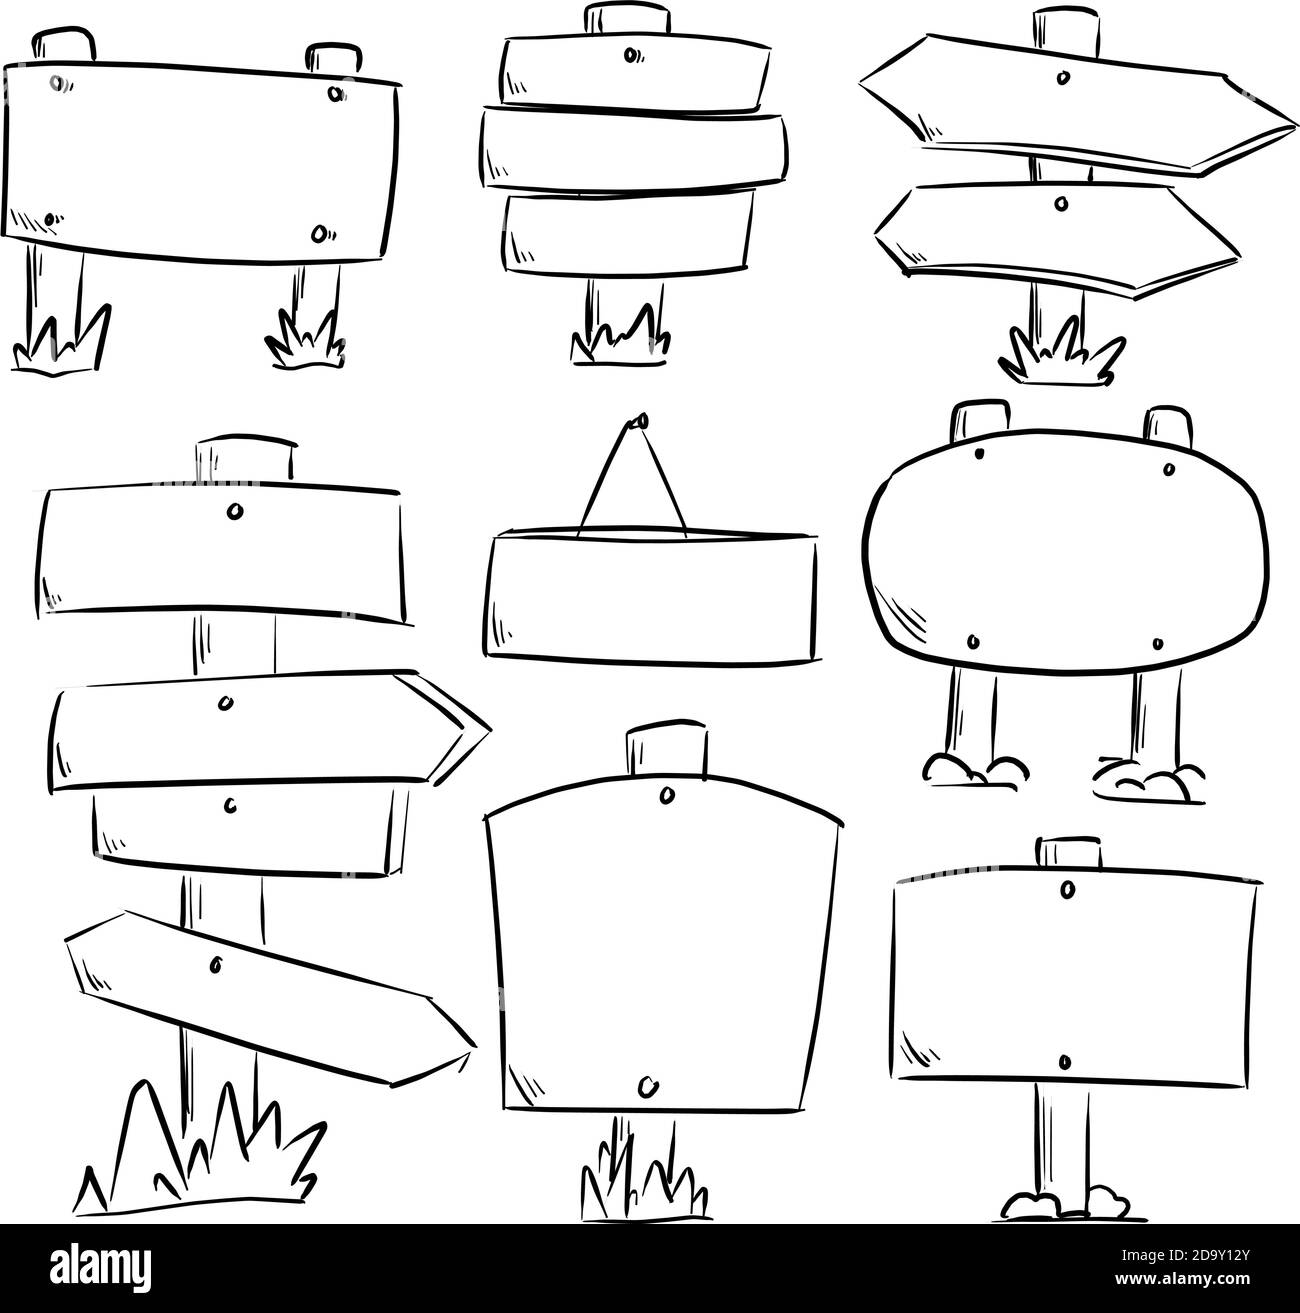 set of wood road signs and arrows vector illustration sketch doodle hand drawn with black lines isolated on white background Stock Vector